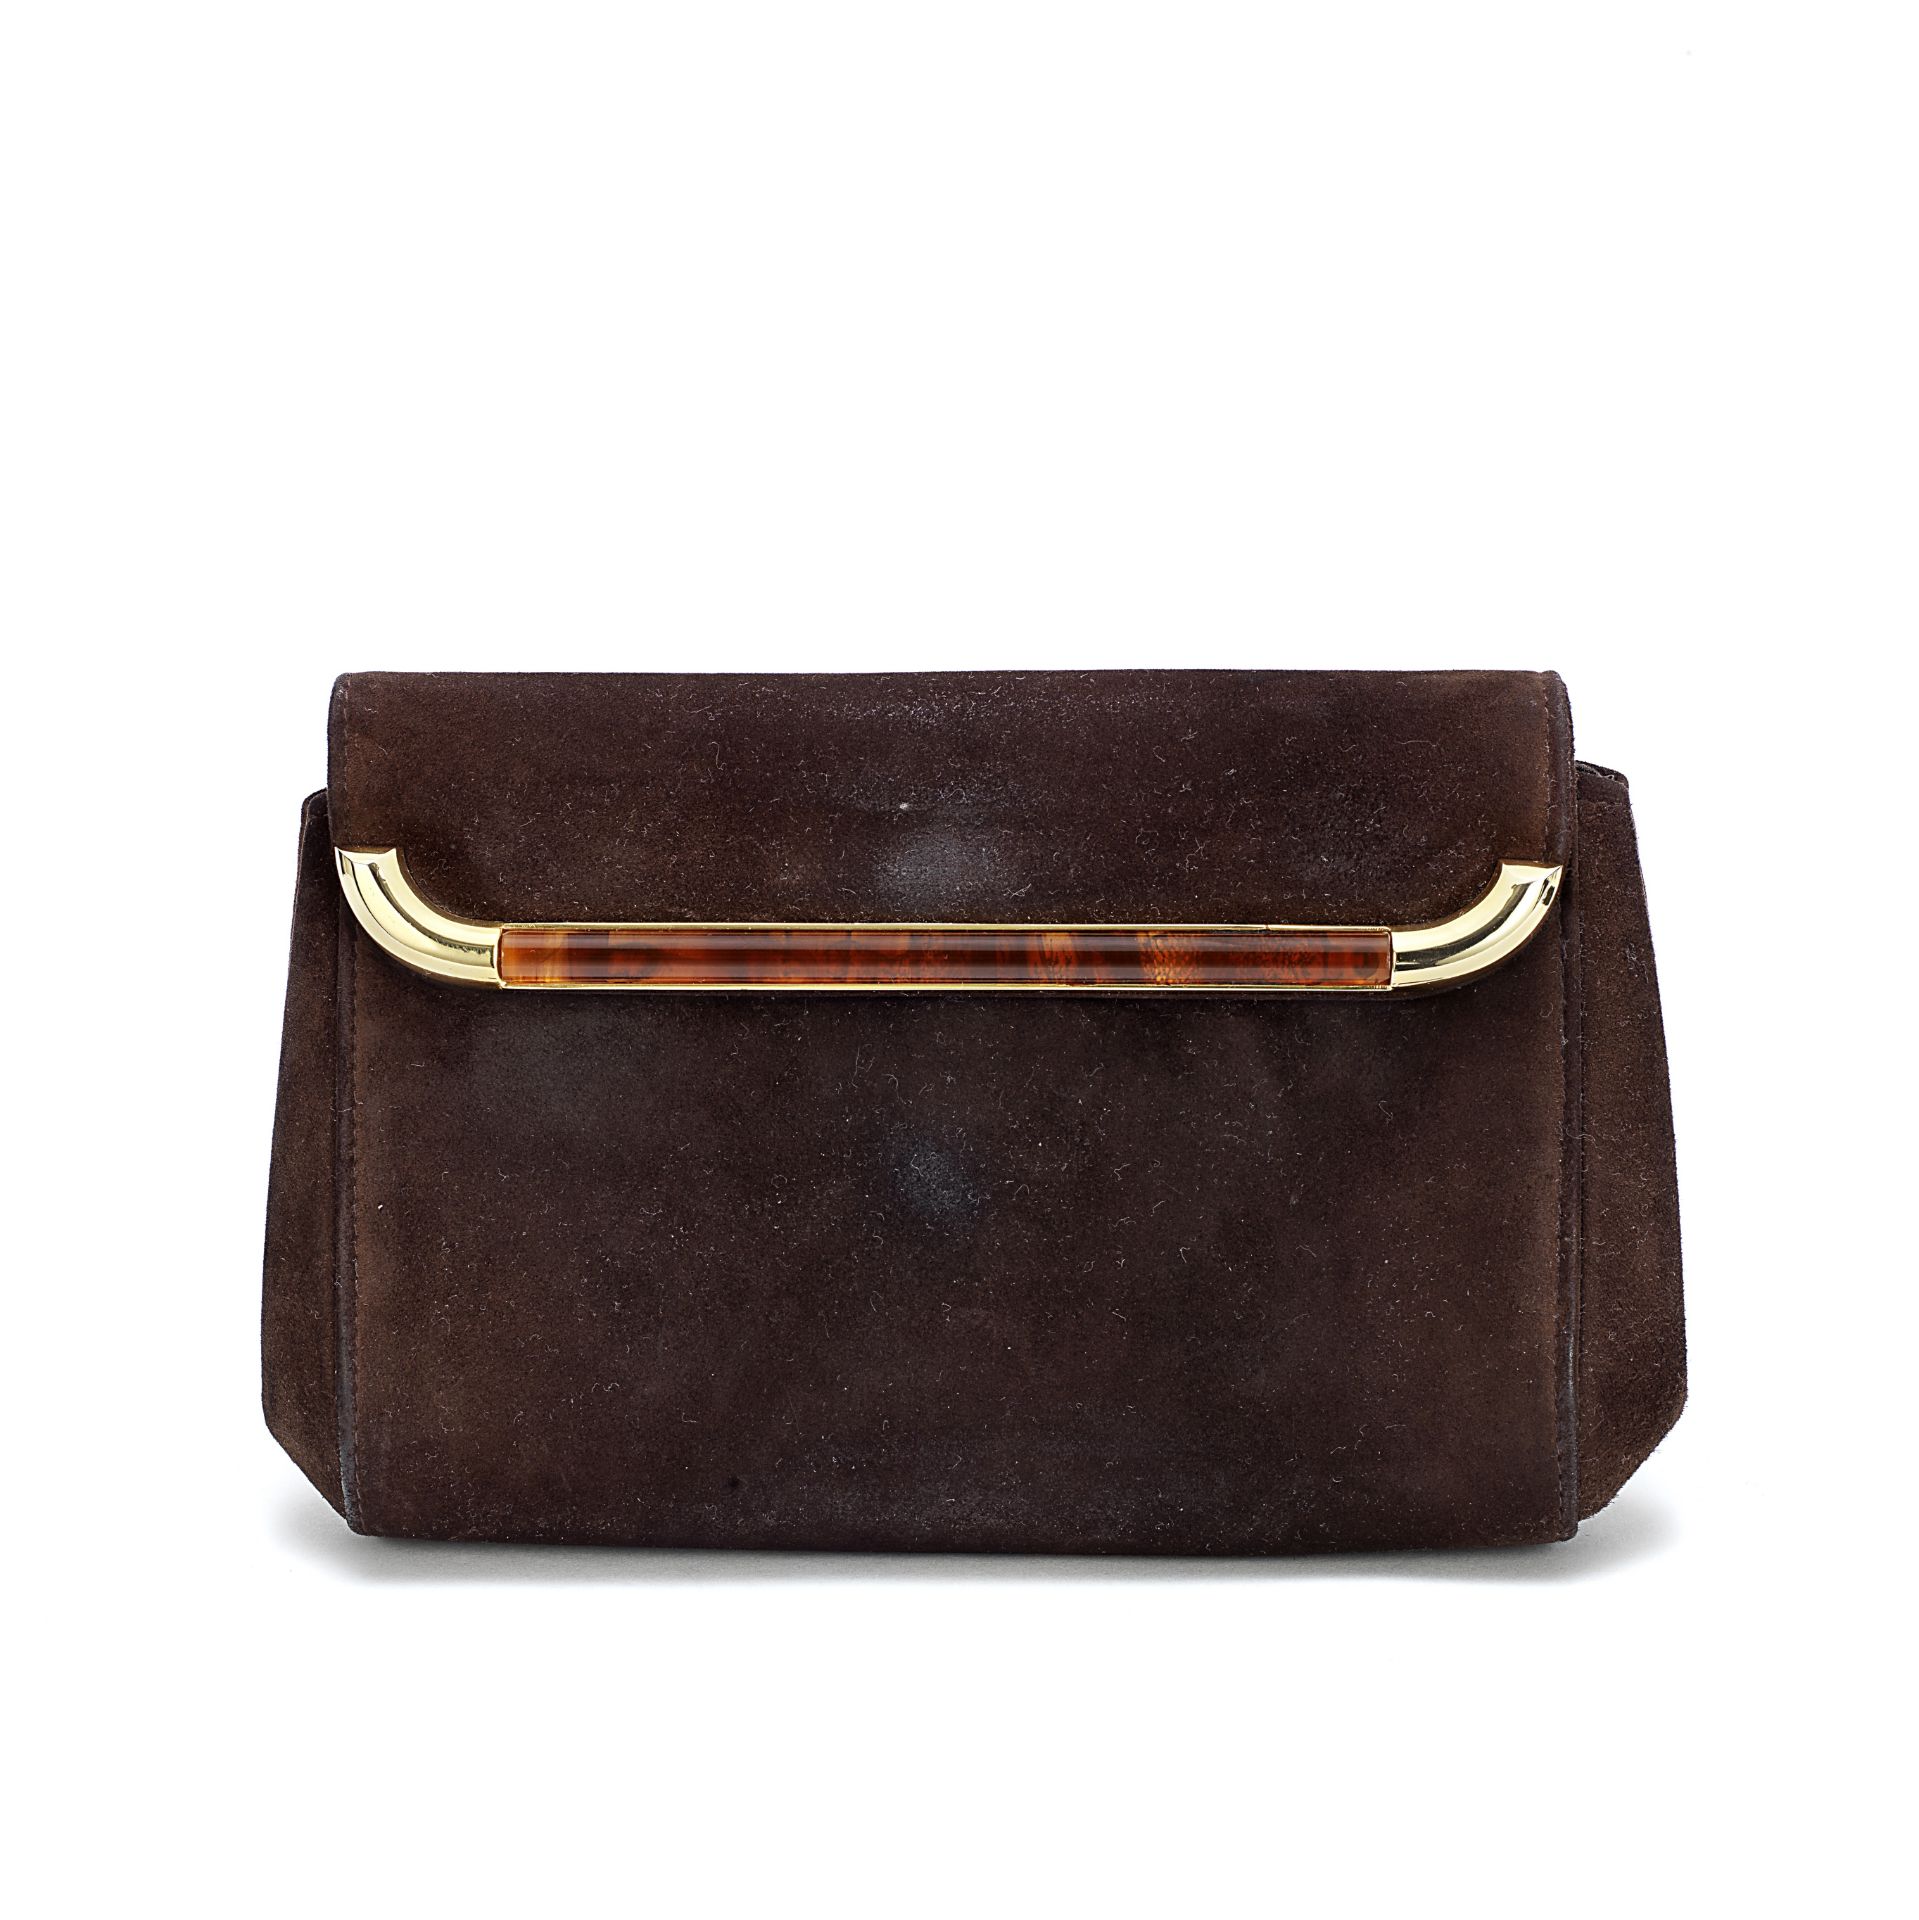 Brown Suede Clutch Bag, Gucci, 1970s, (Includes mirror and dust bag)